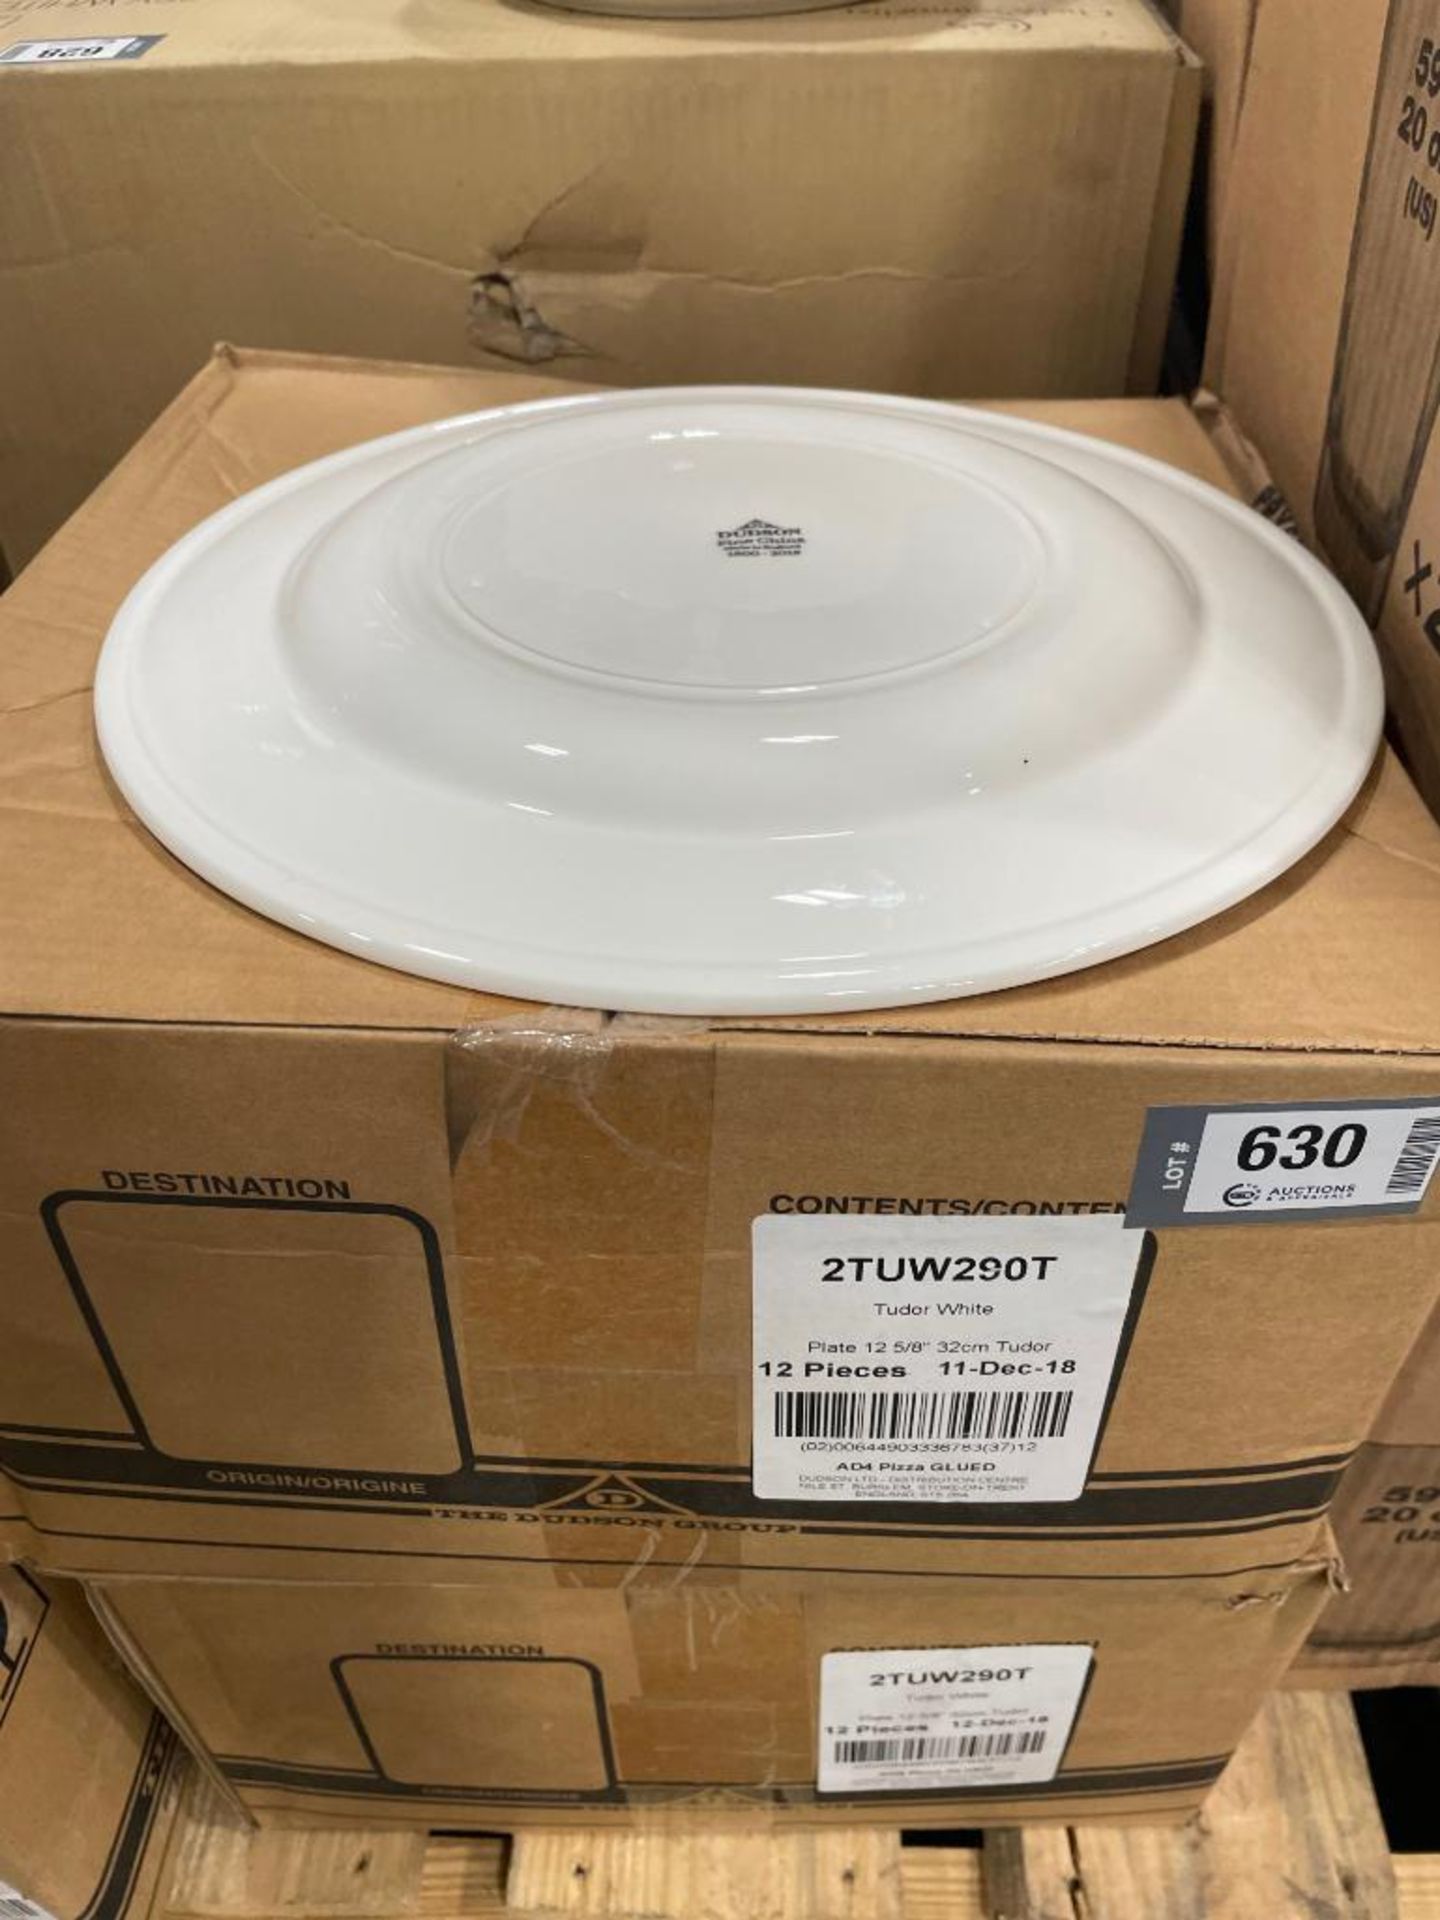 3 CASES OF DUDSON TUDOR WHITE WIDE RIM PLATES 12" - 12/CASE, MADE IN ENGLAND - Image 2 of 4